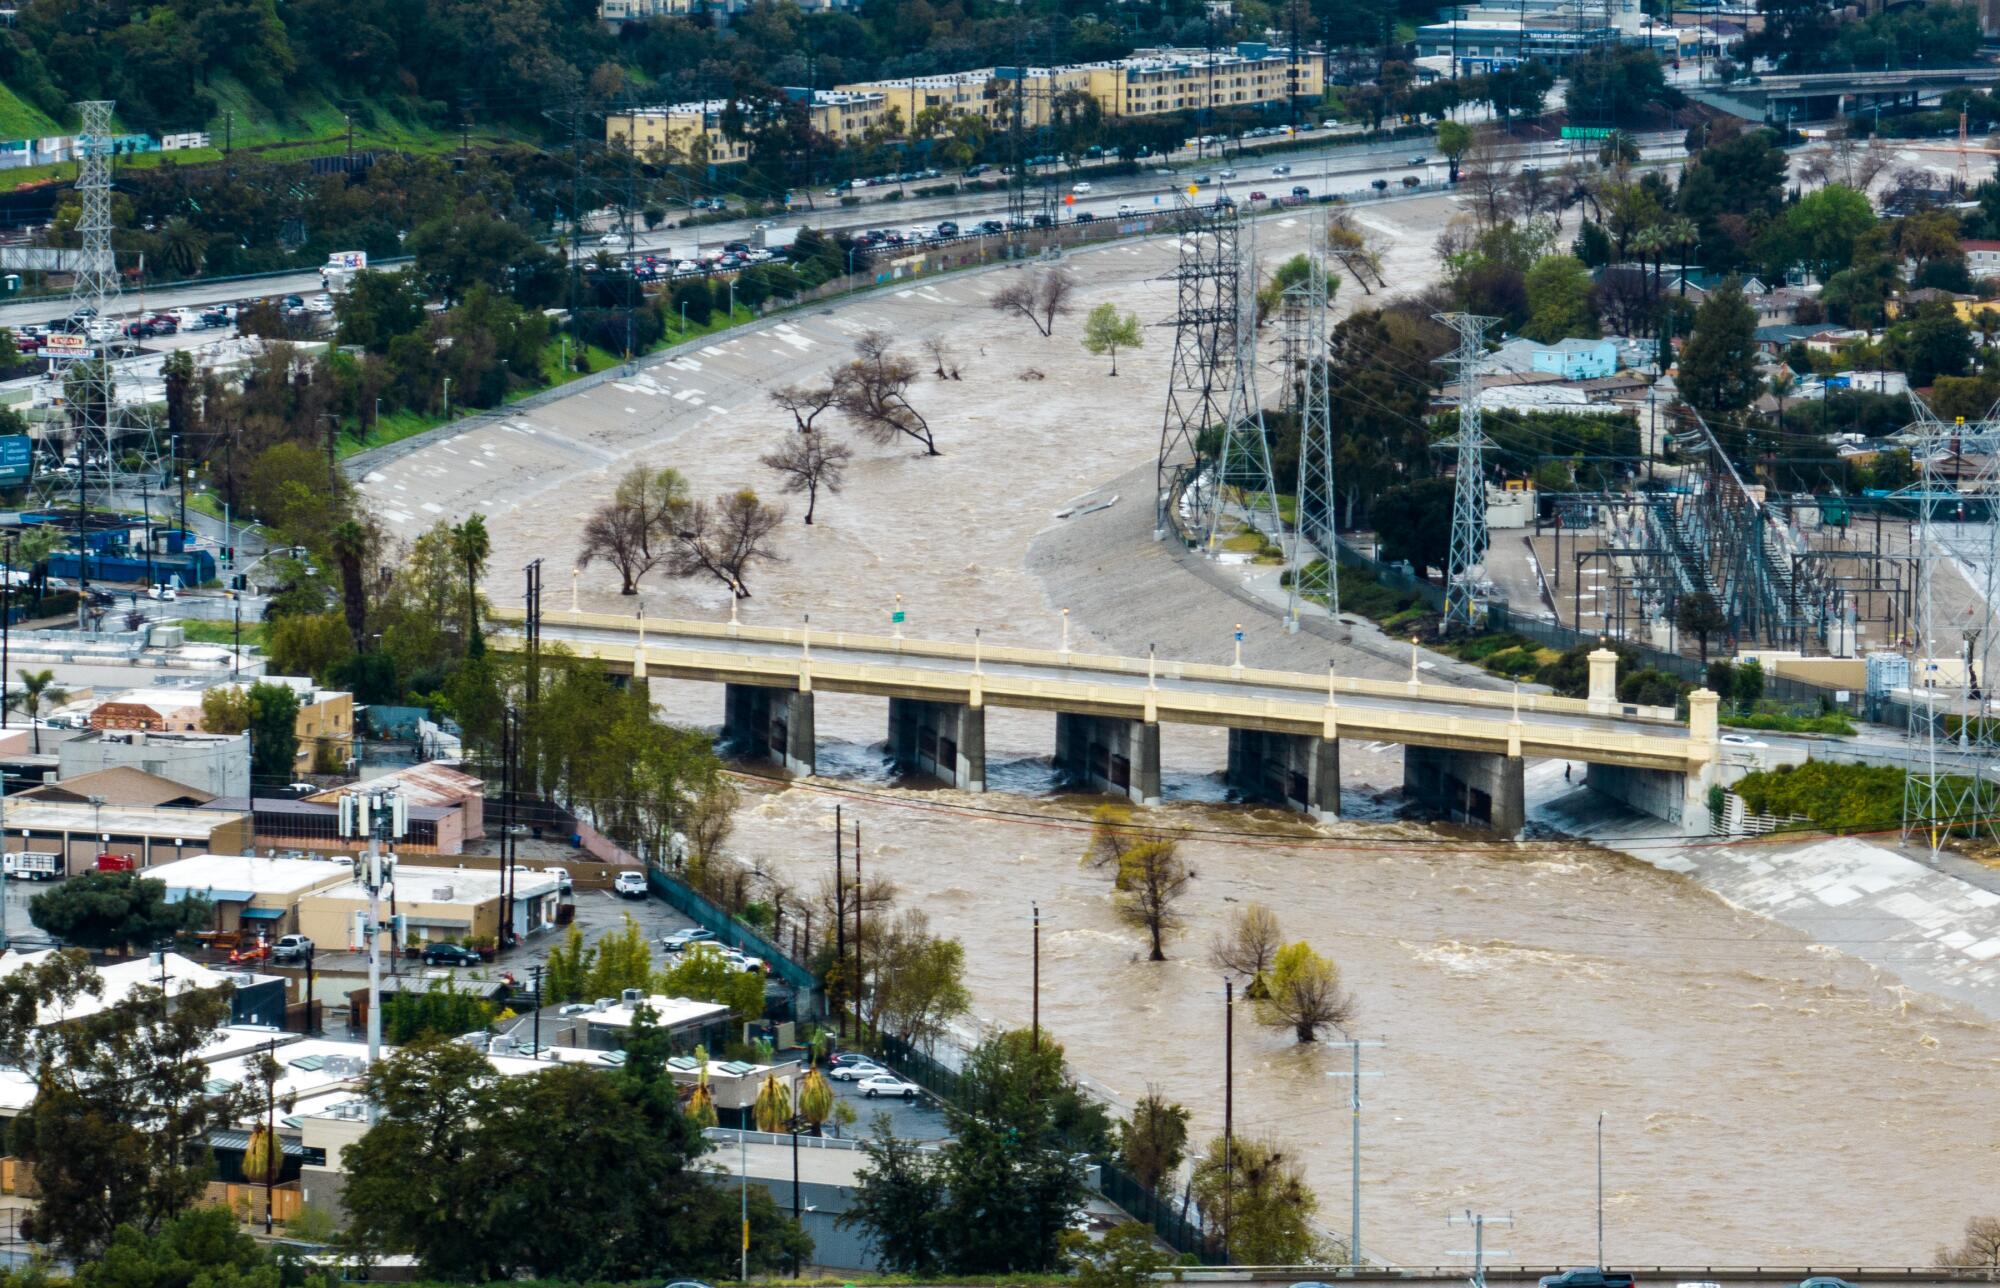 The Los Angeles River in the Frogtown neighborhood on Saturday.